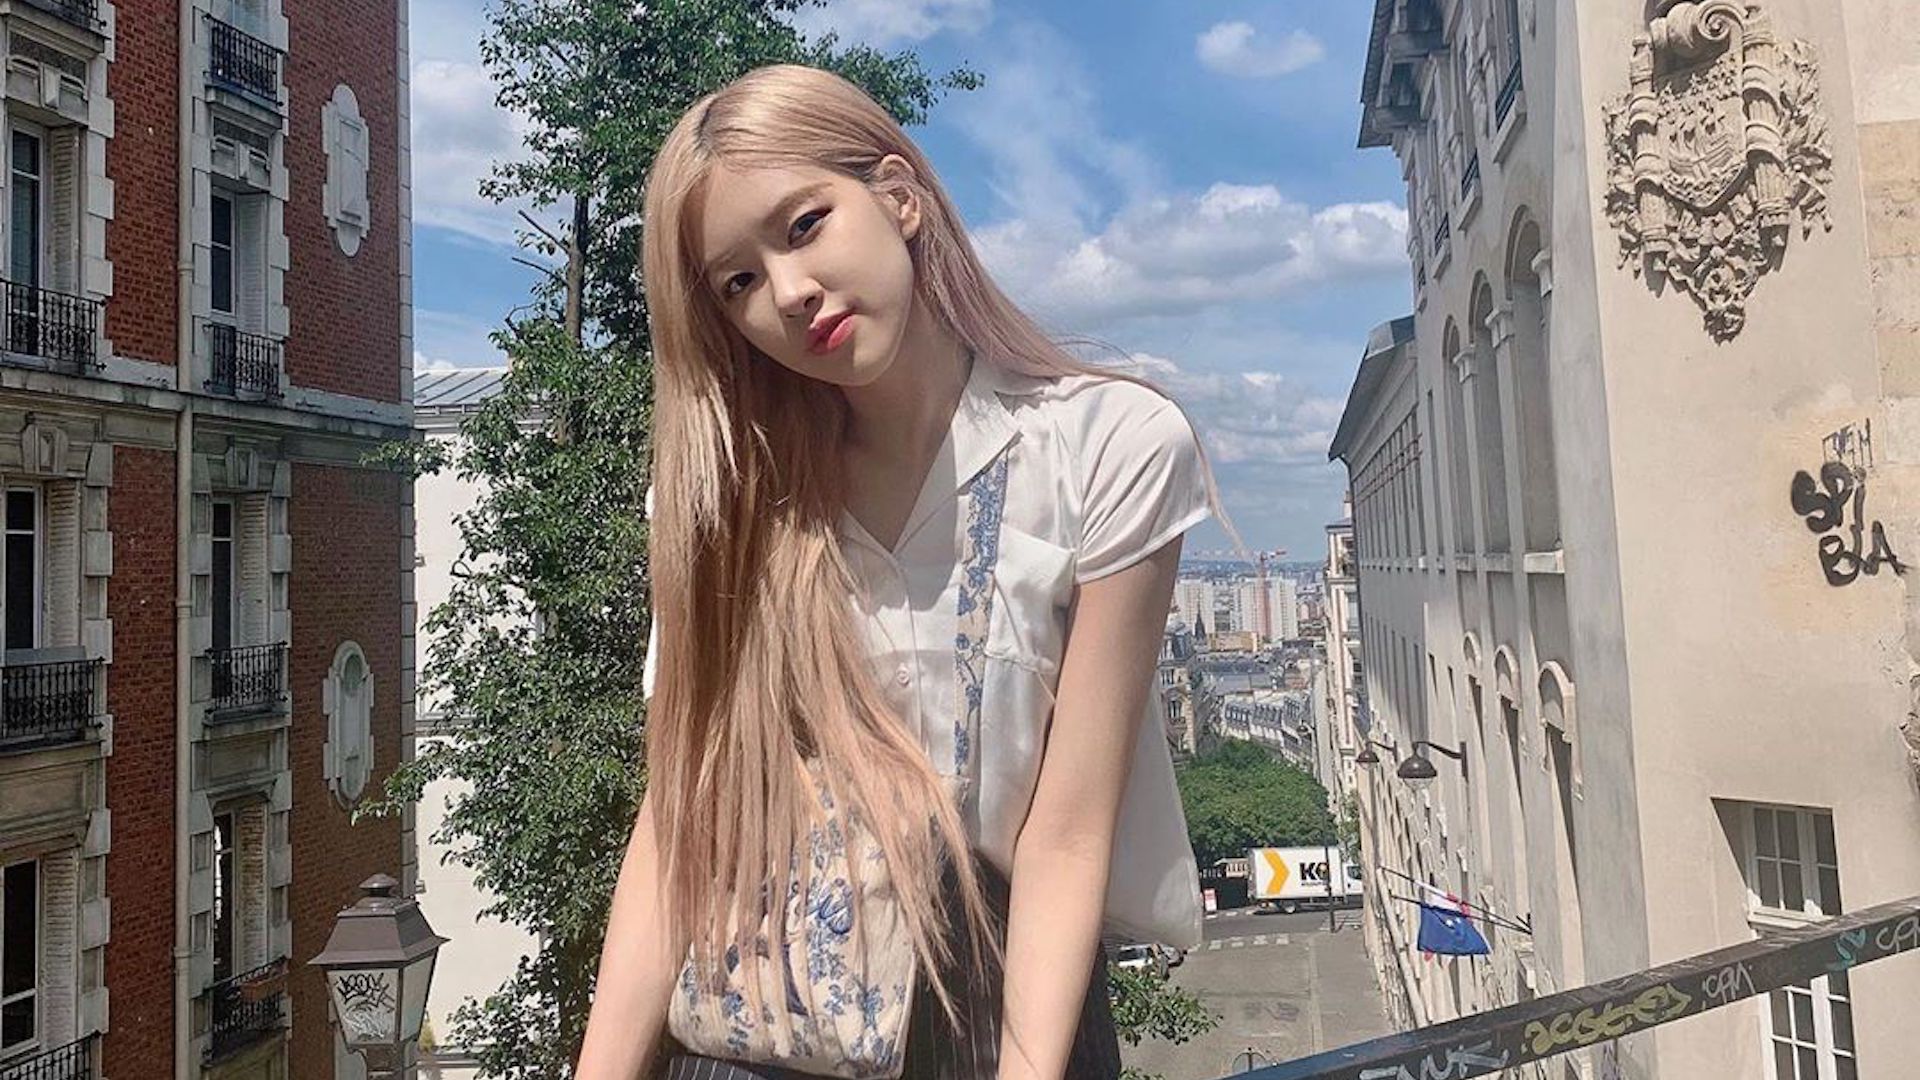 Rosé FROM bLANKPINK